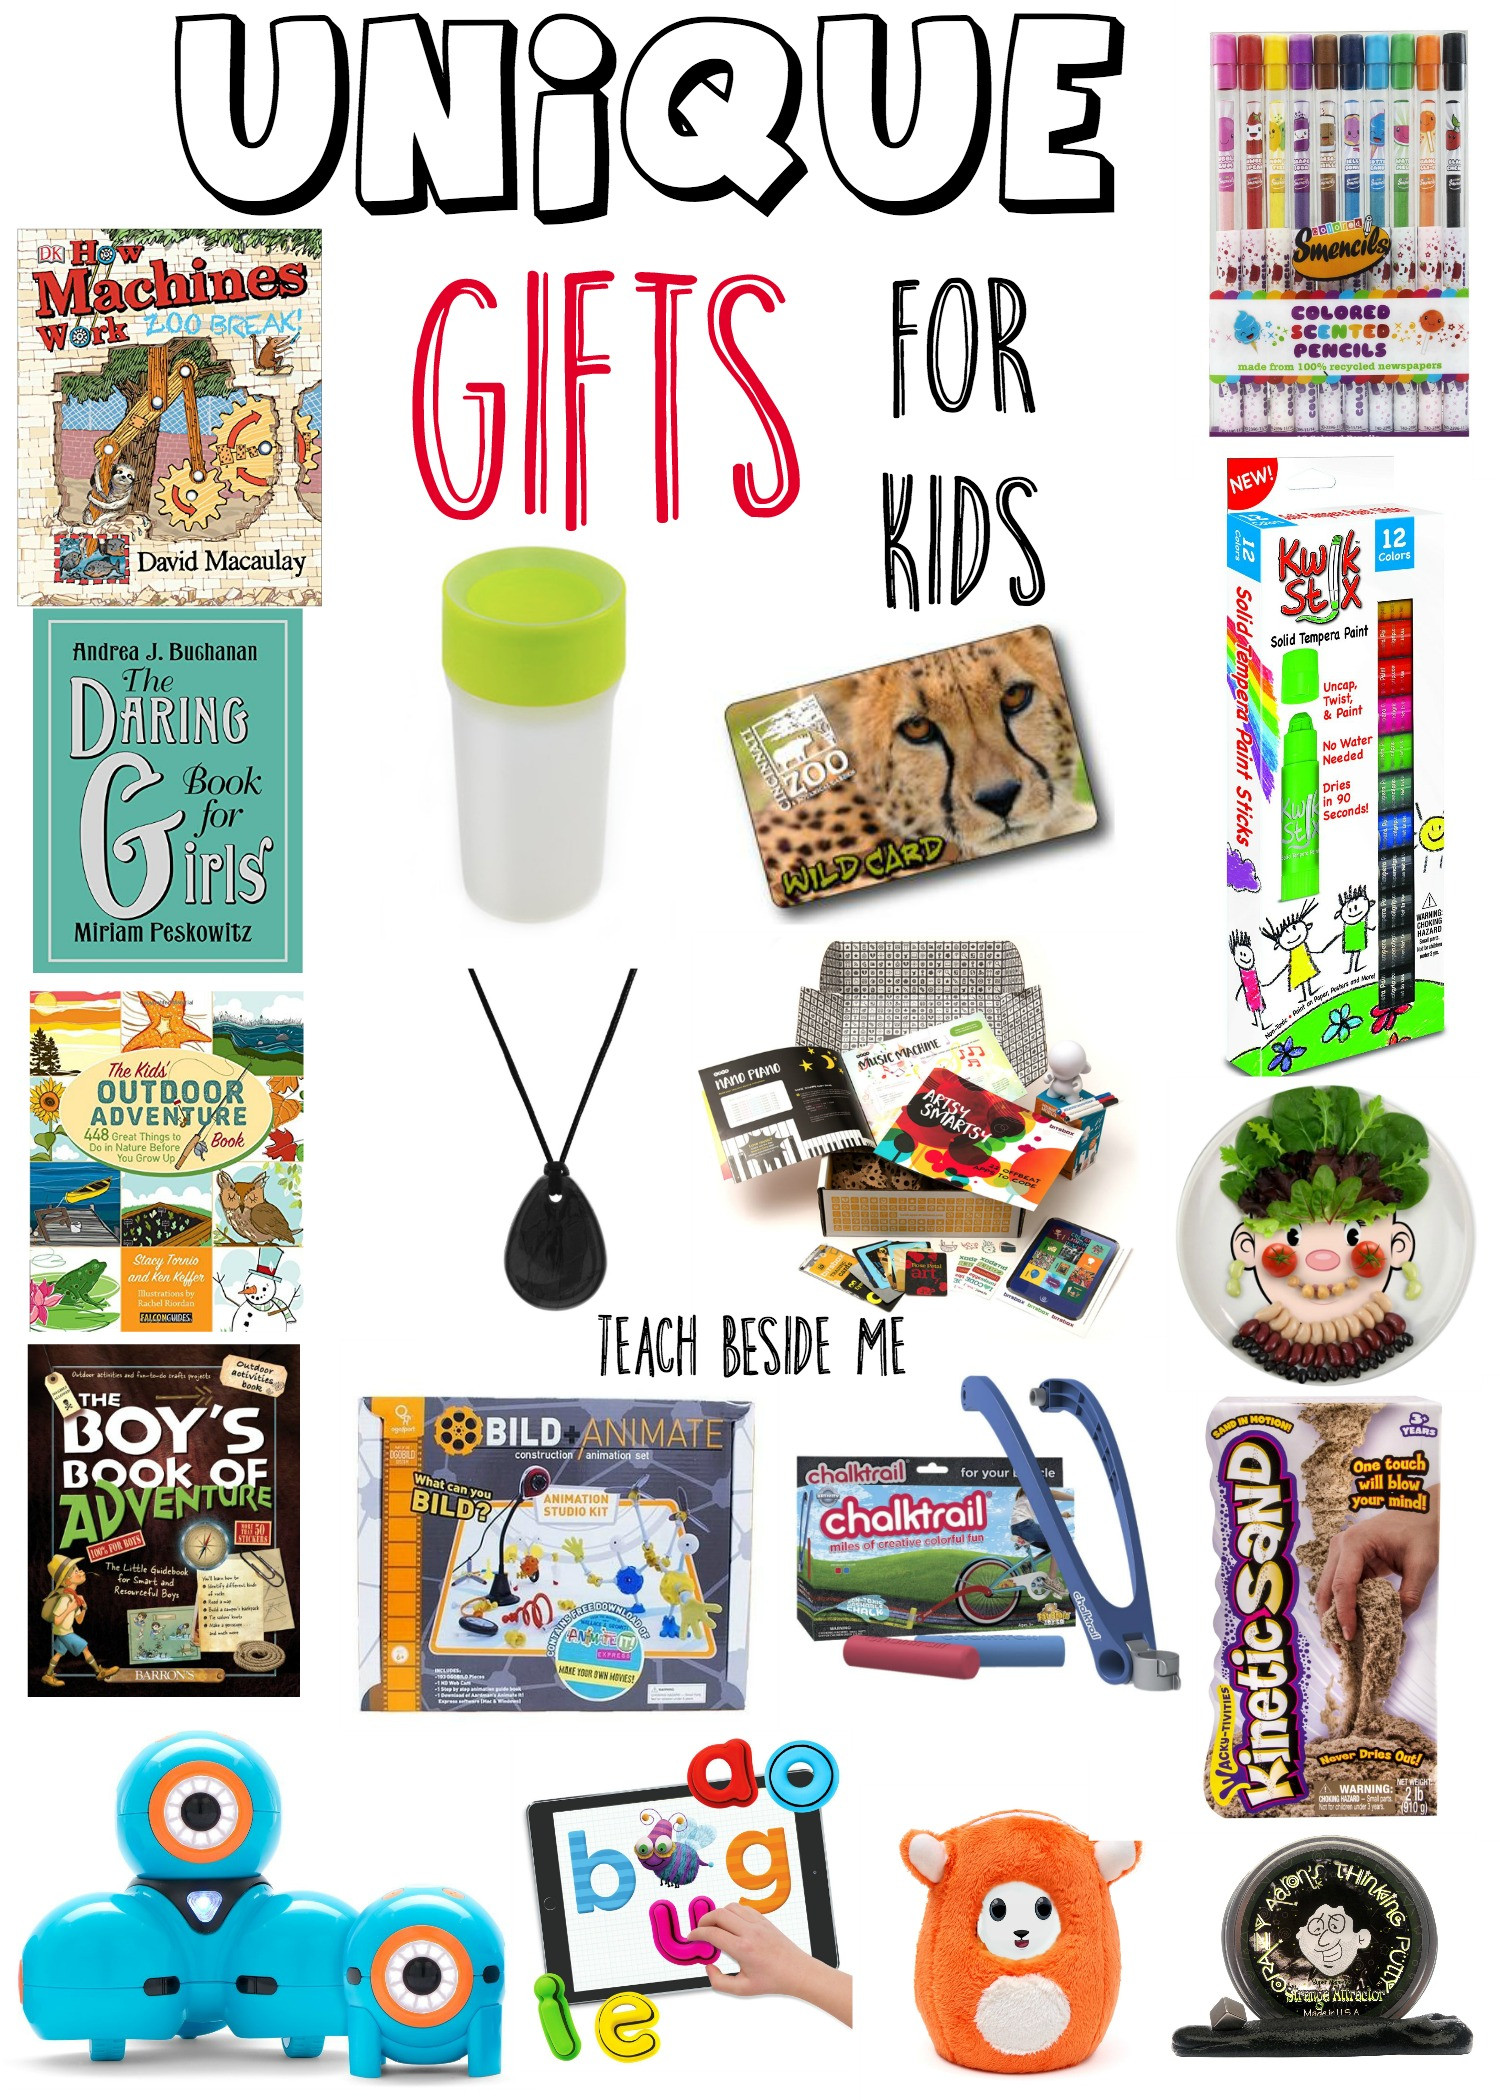 Cool Christmas Gifts For Kids
 Unique Gifts for Kids Teach Beside Me